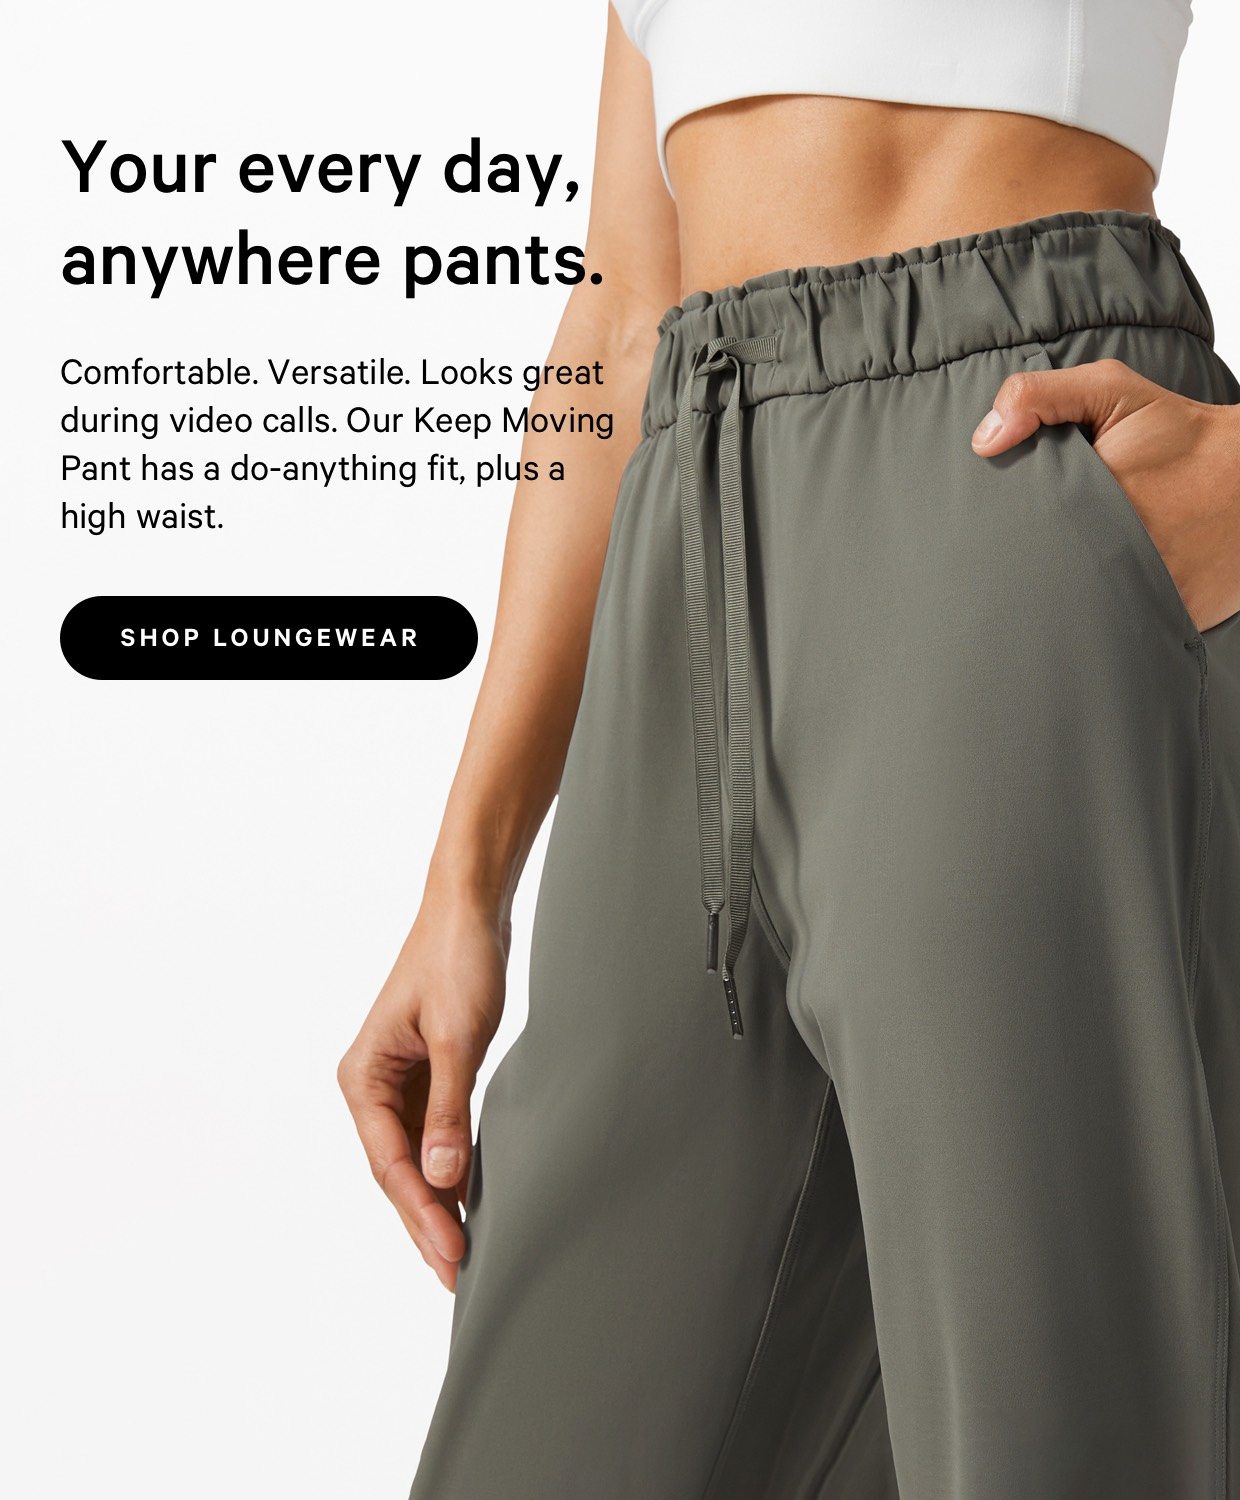 Really comfortable pants, ready to work from home - lululemon Email Archive